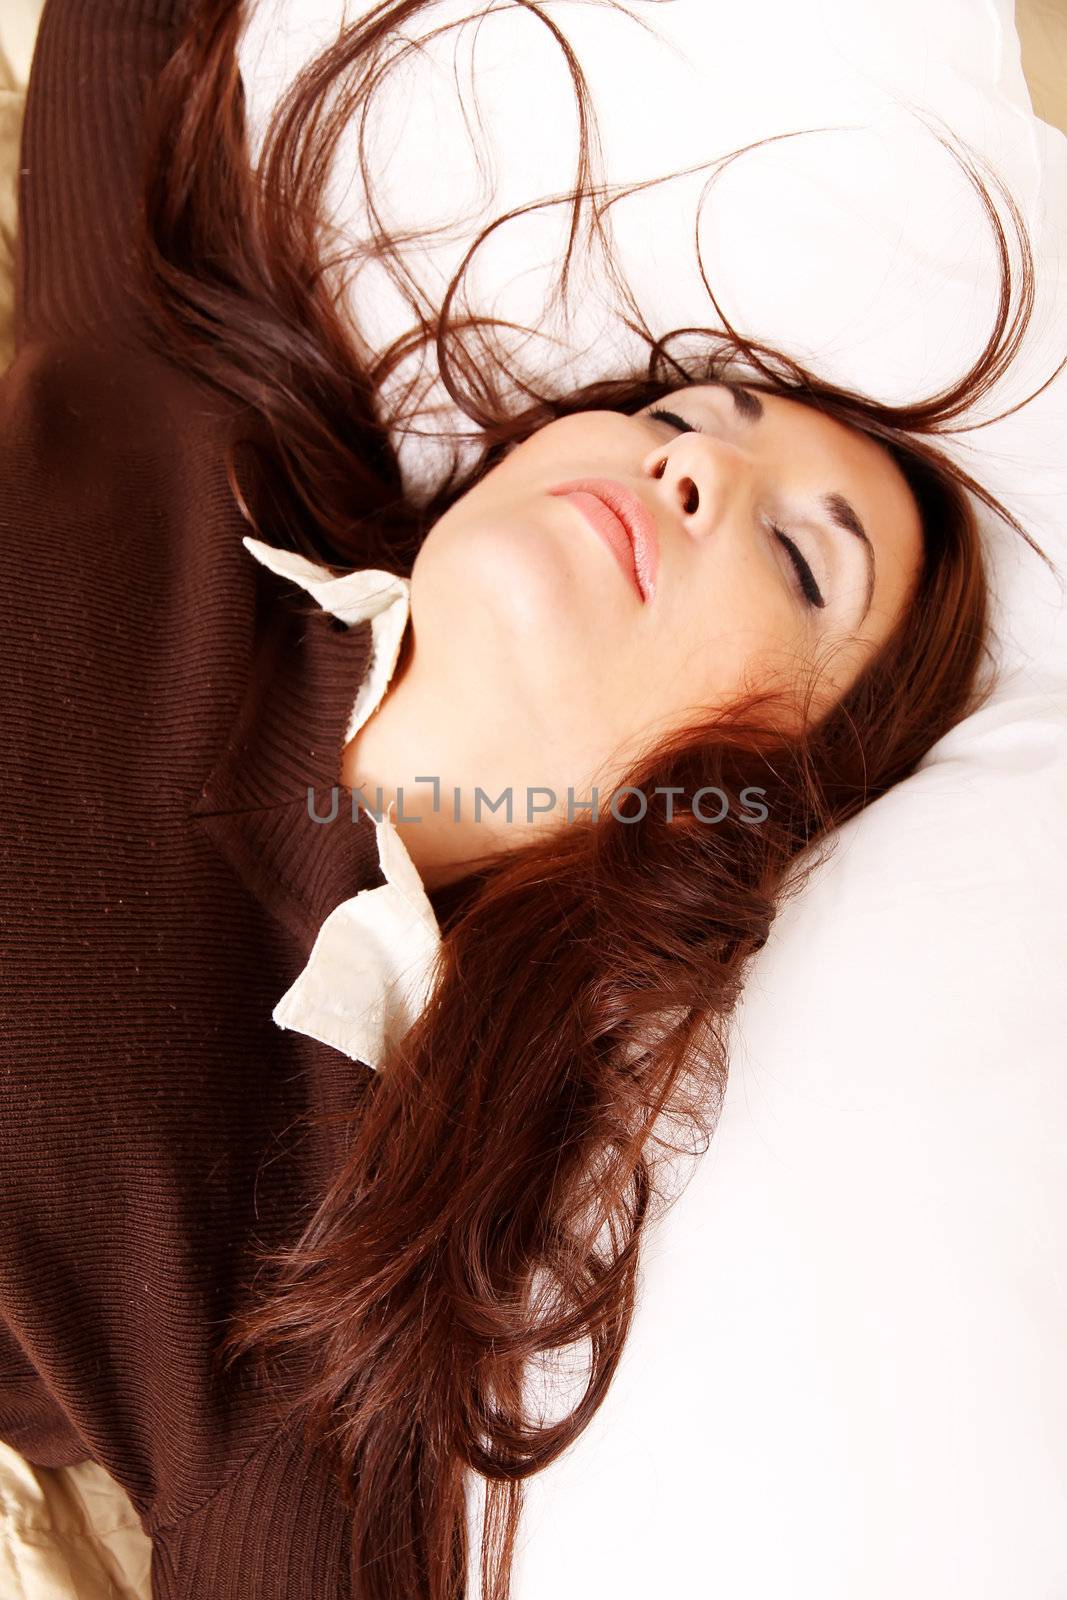 A sleeping young woman in bed.